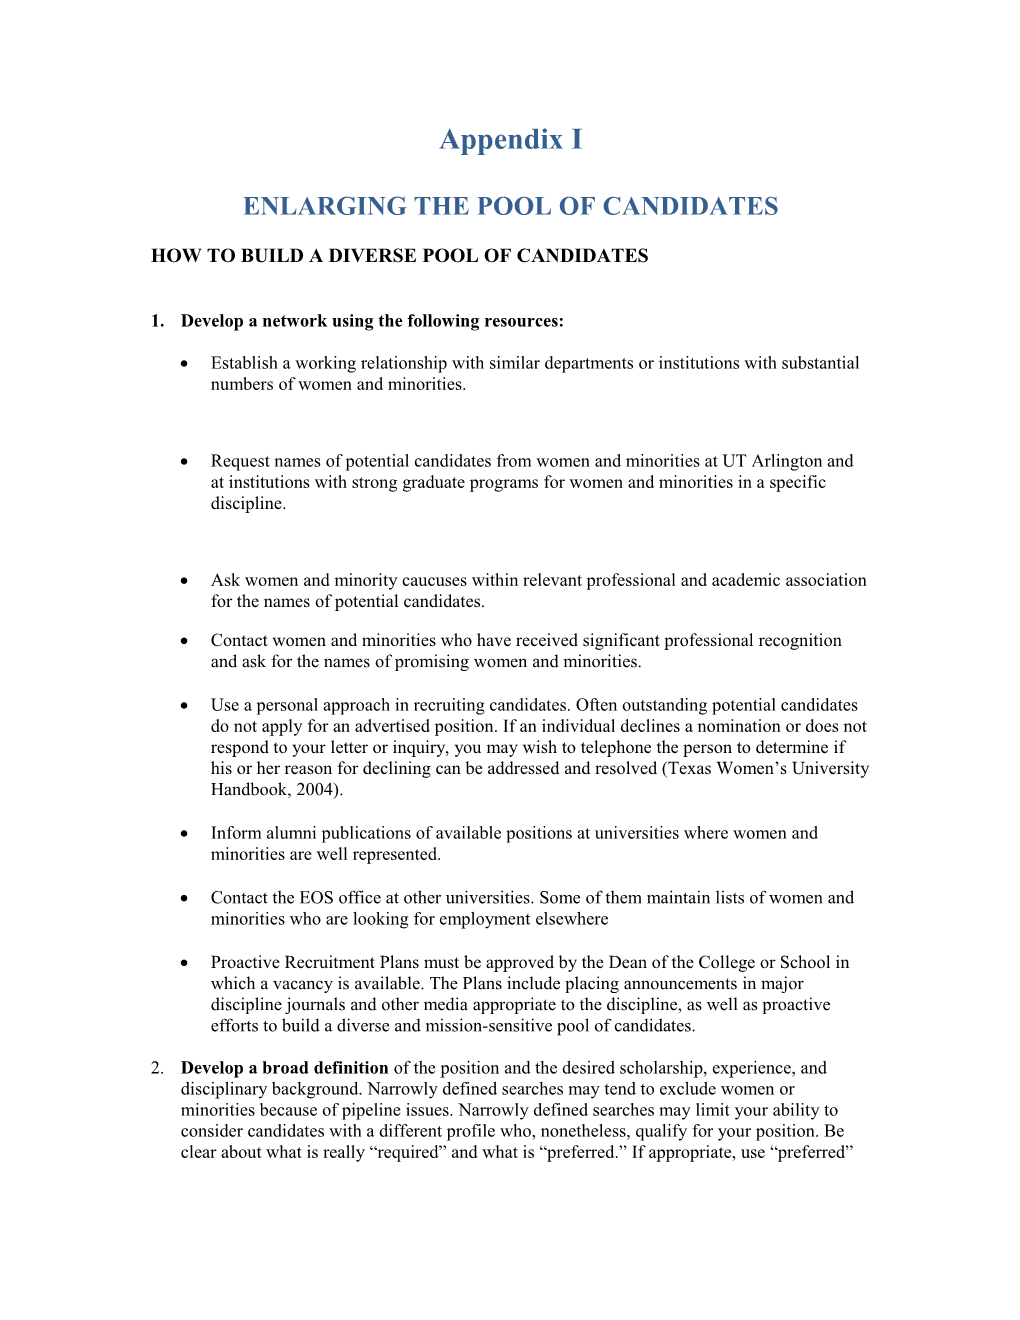 Enlarging the Pool of Candidates